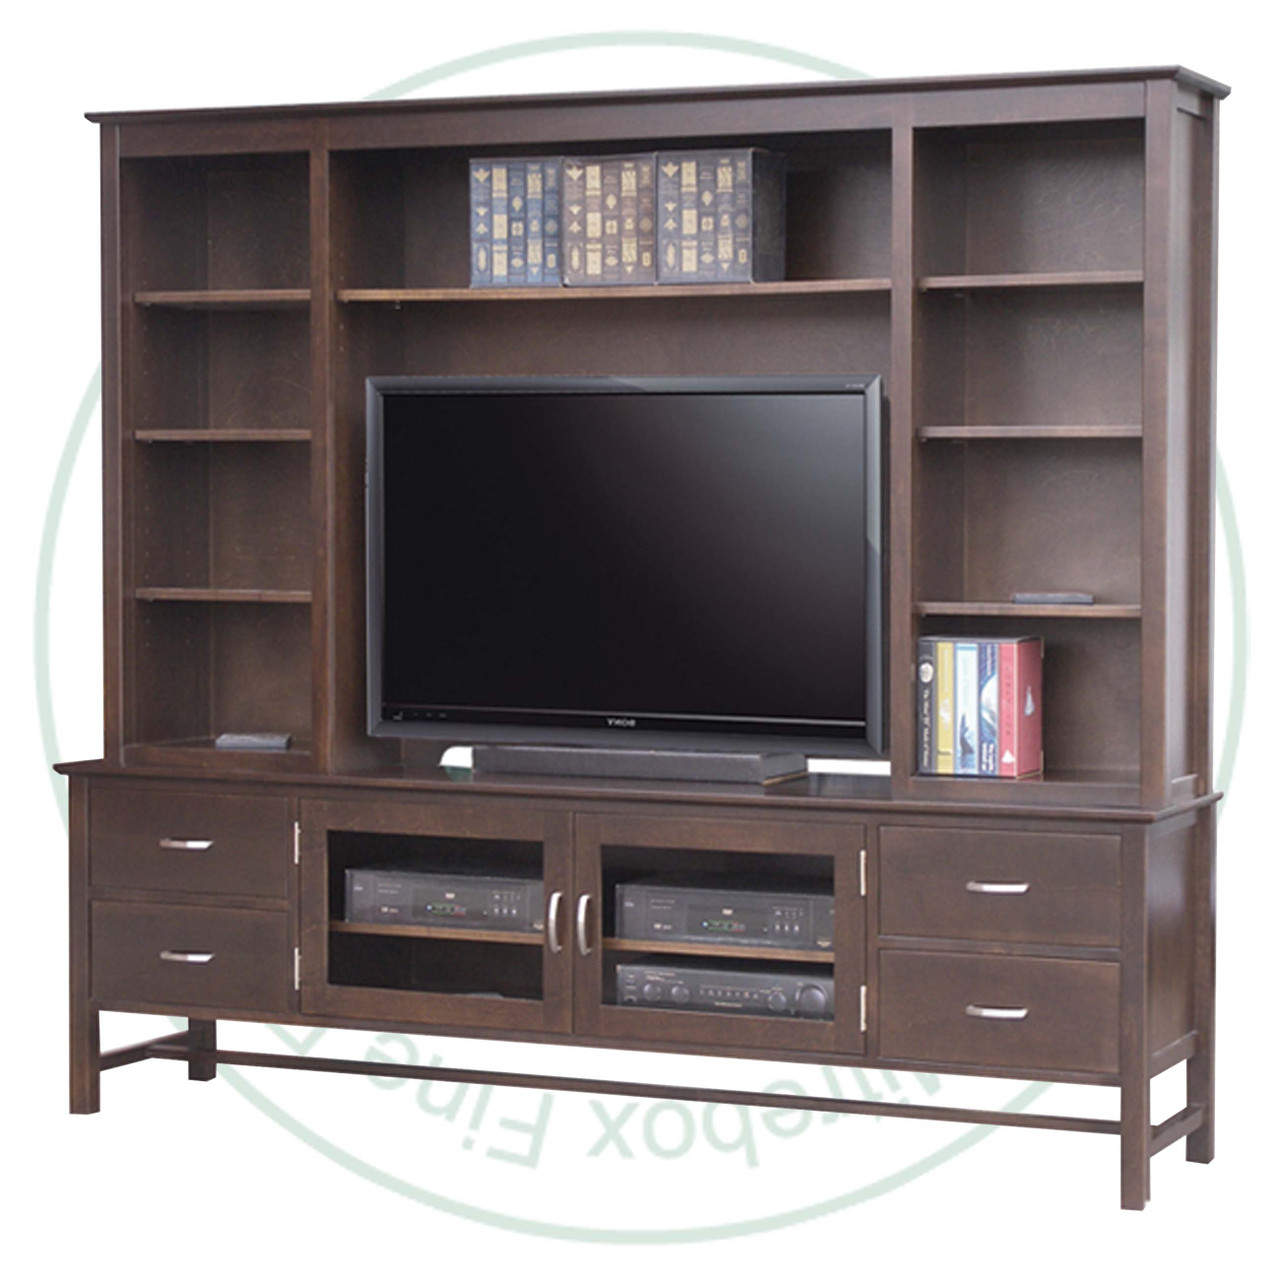 Maple Brooklyn HDTV Entertainment Cabinet With Hutch 19.5'' Deep x 85'' Wide x 77'' High